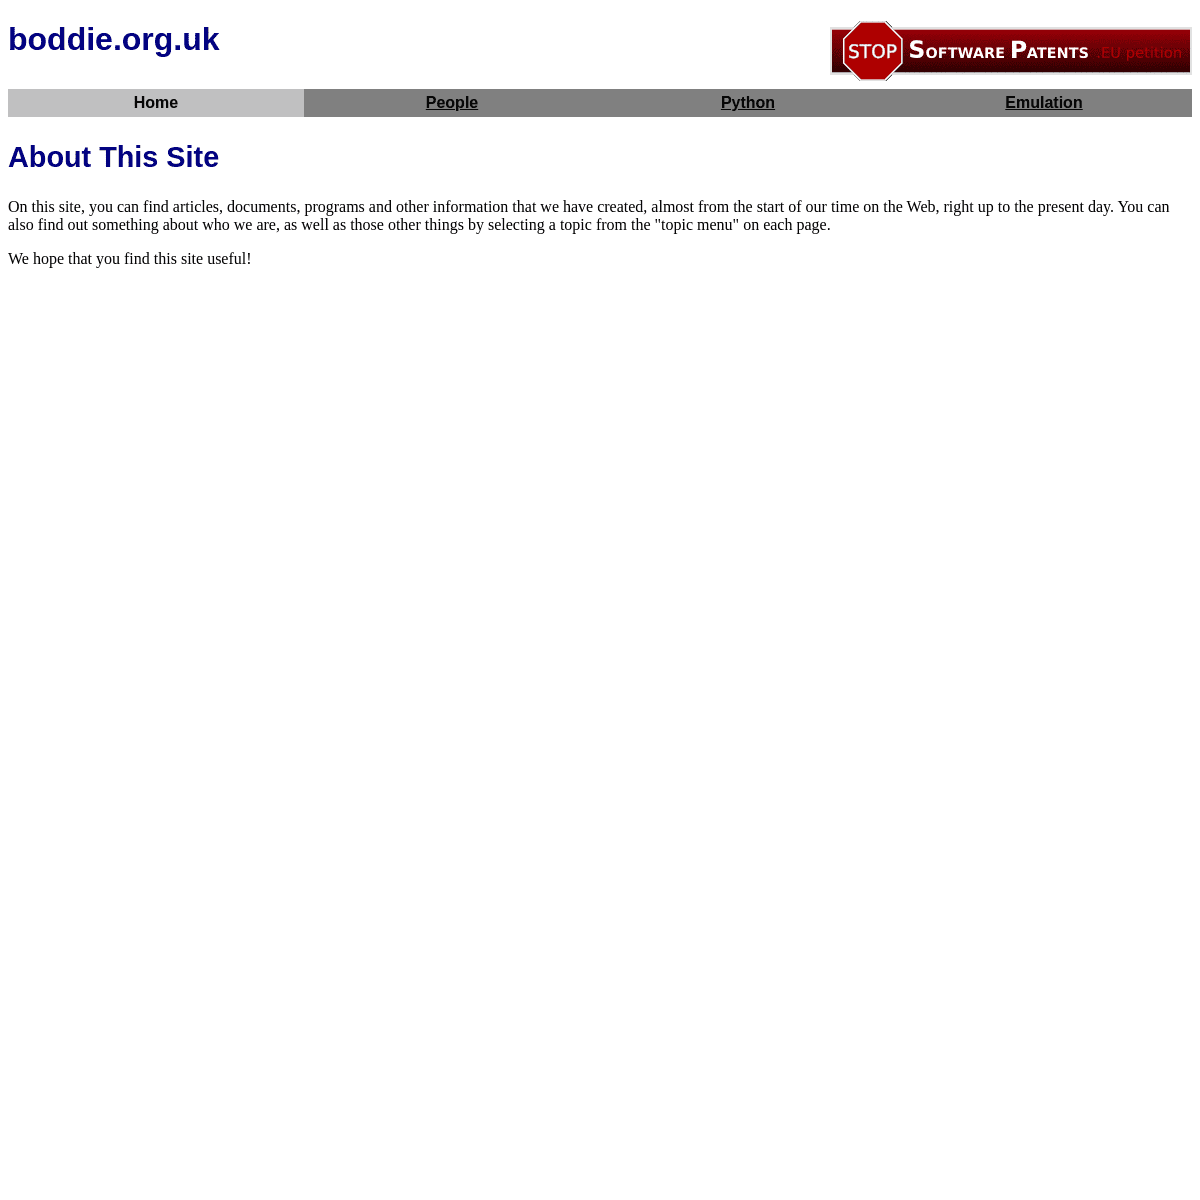 A complete backup of https://boddie.org.uk